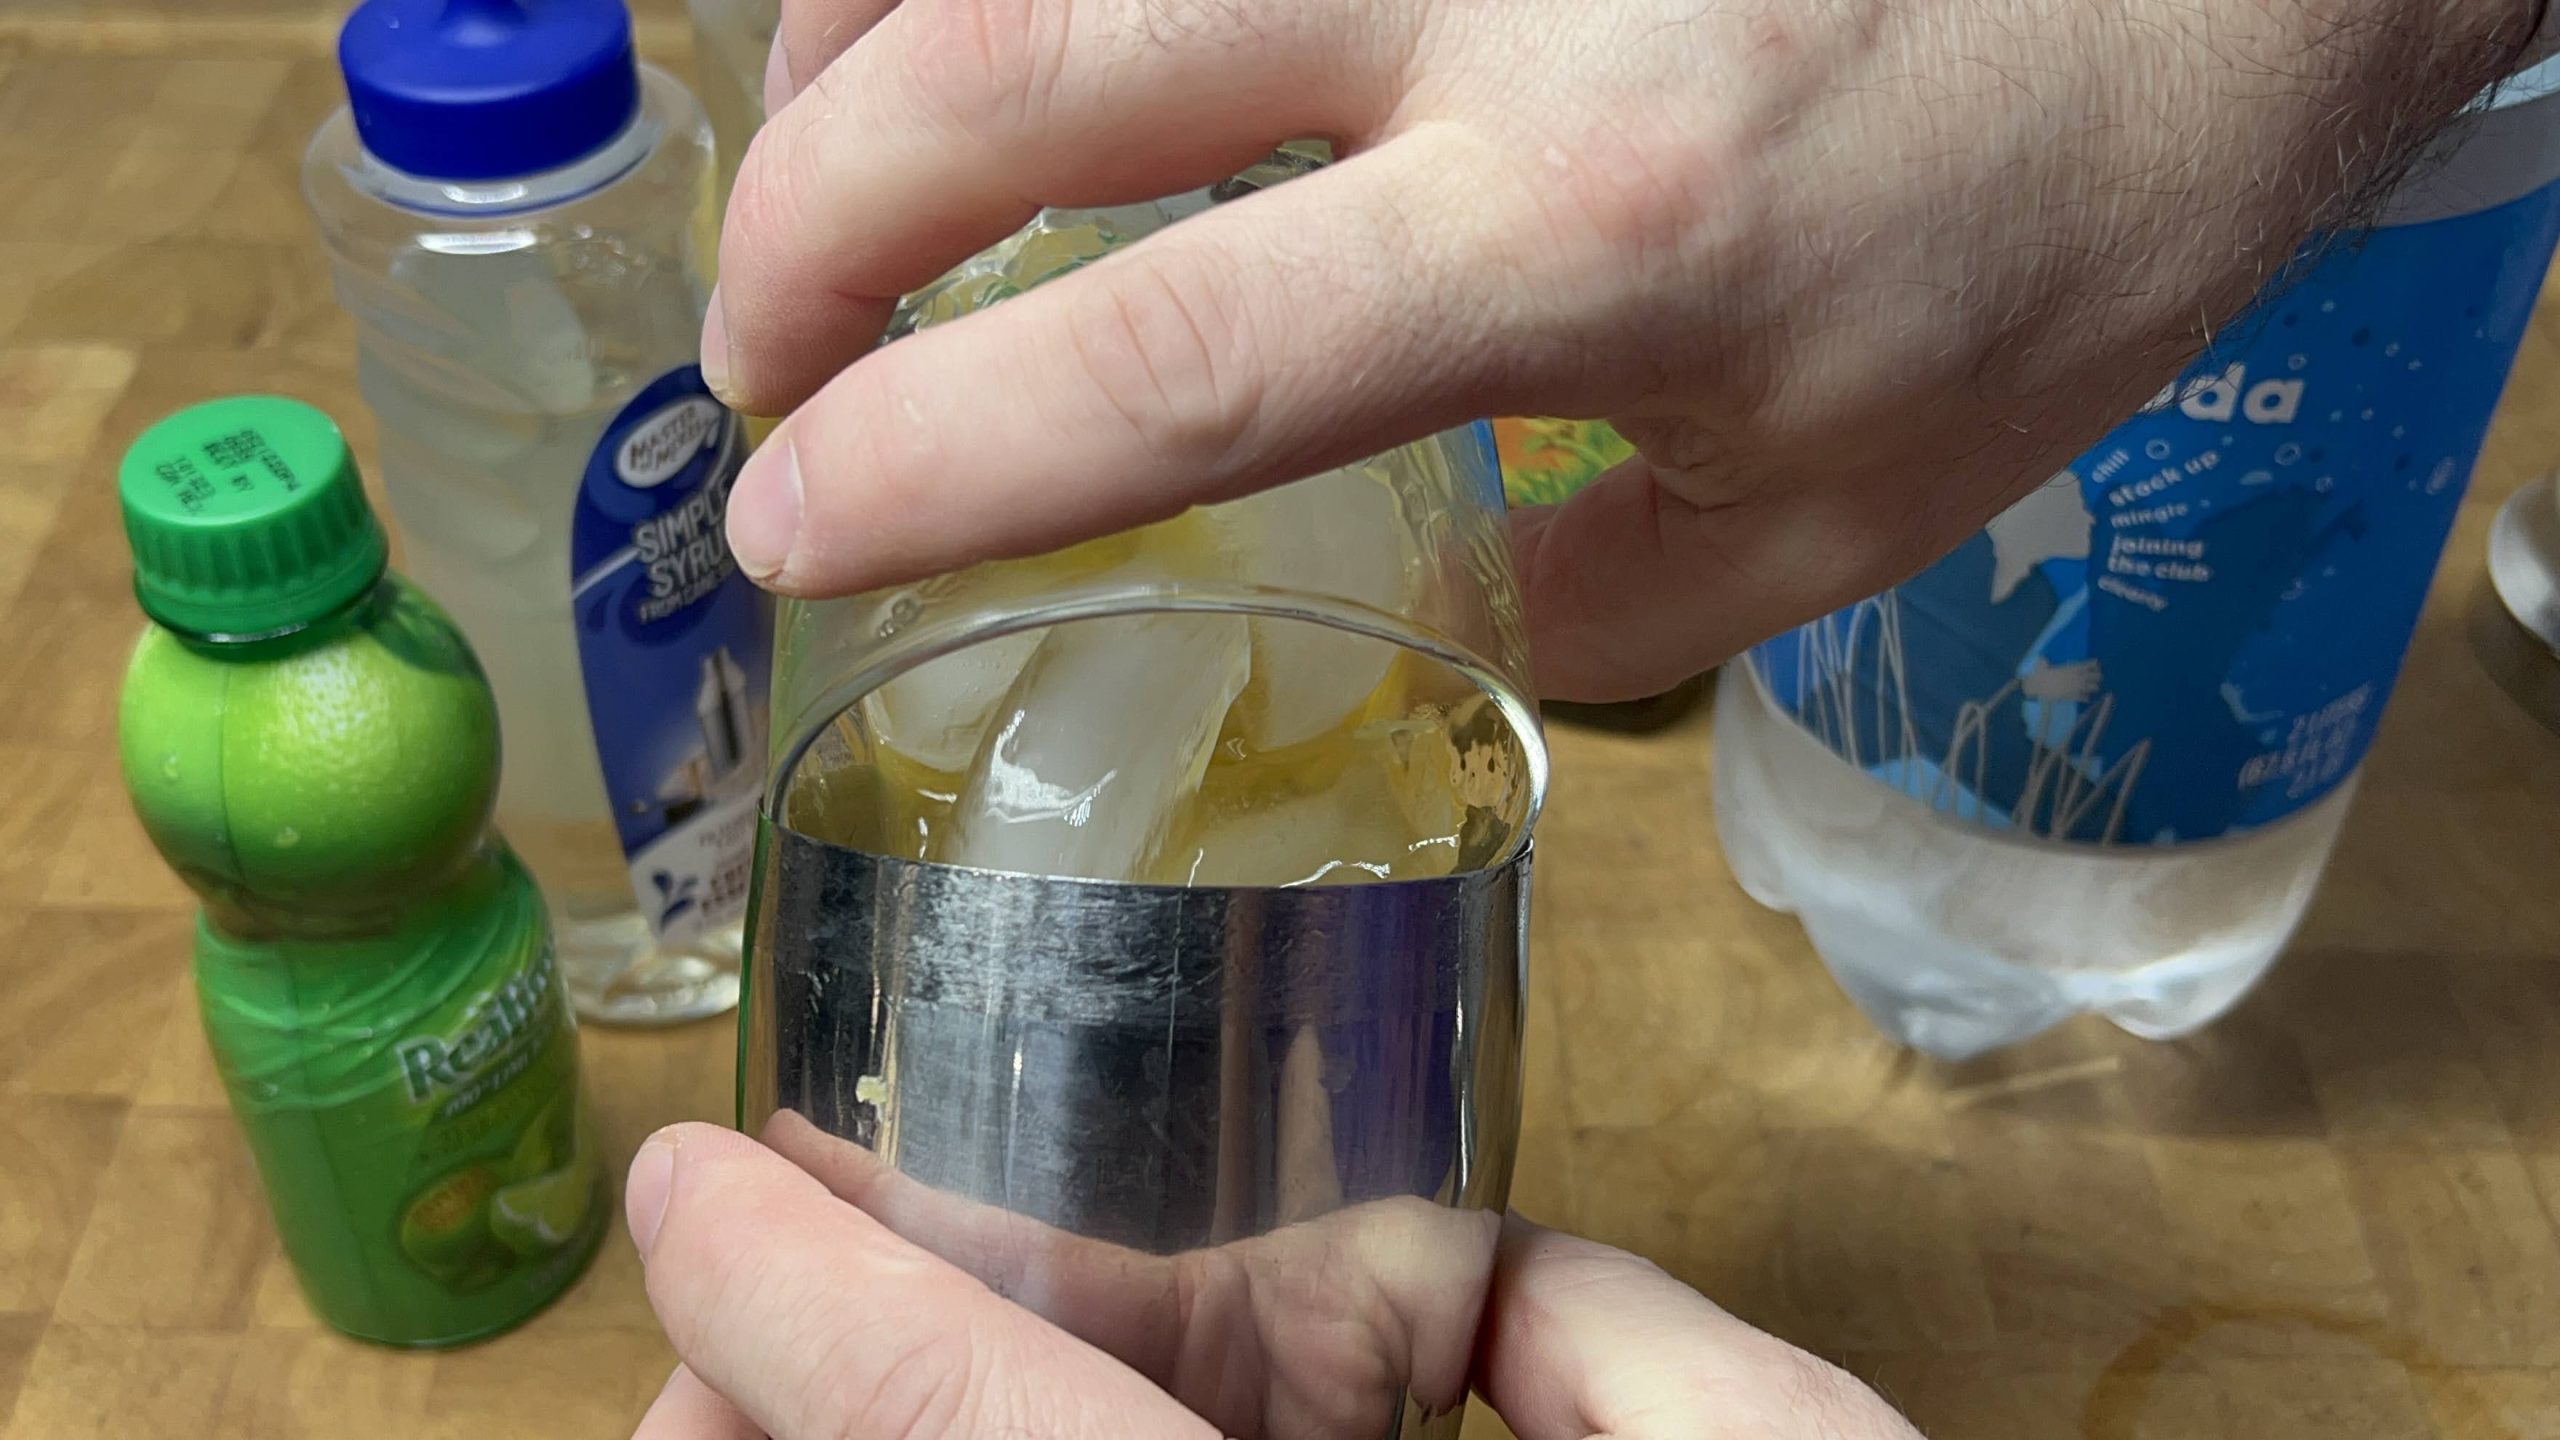 pouring planters punch into a cocktail shaker